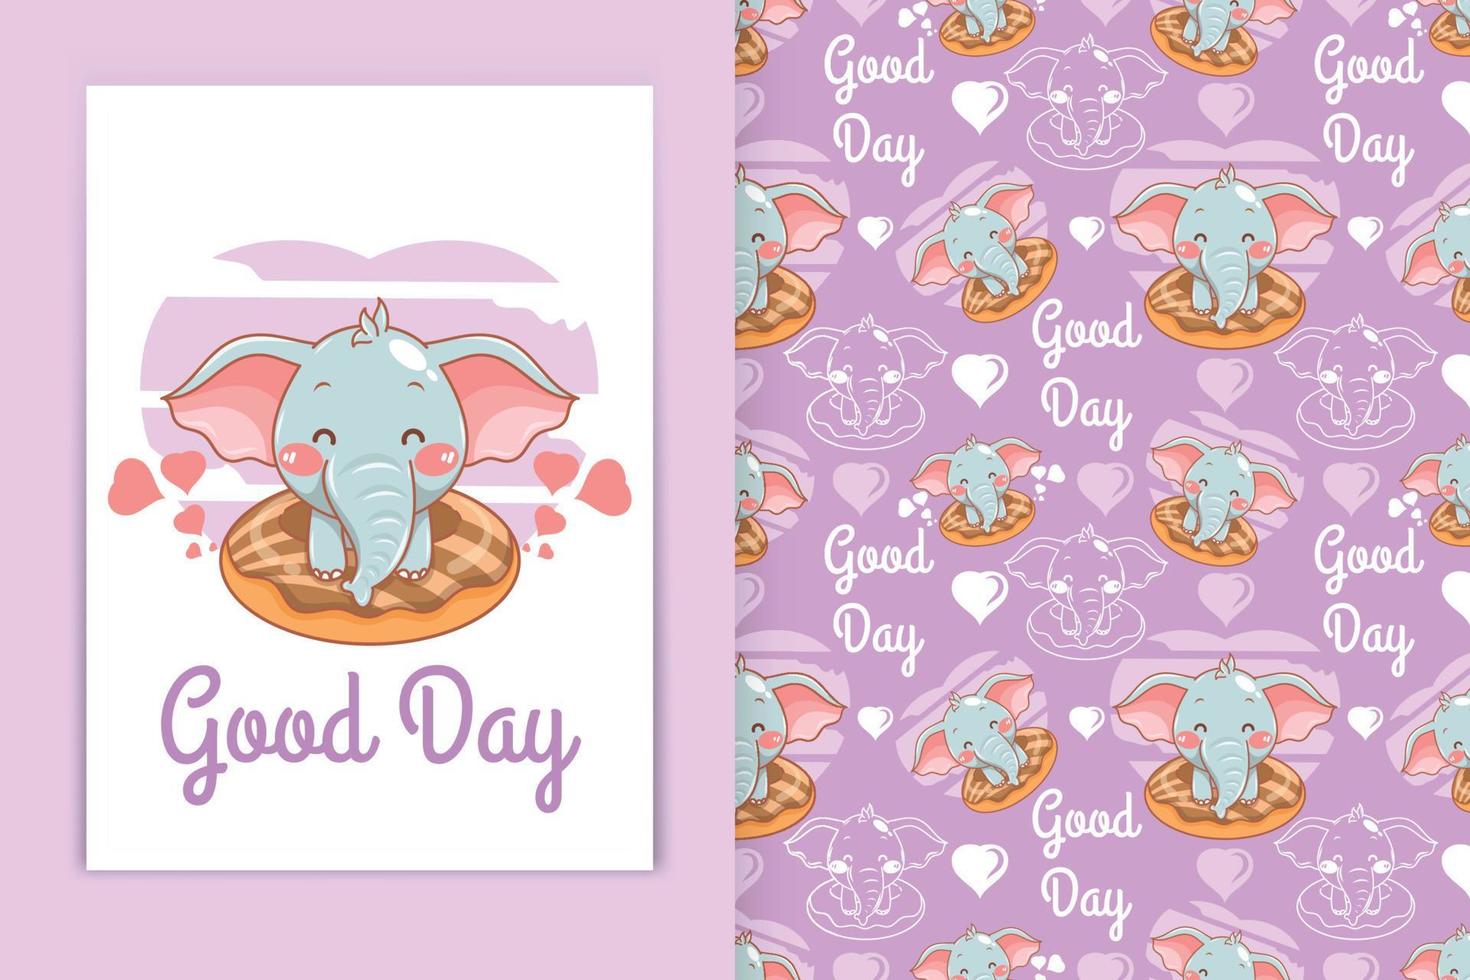 cute baby elephant with donuts cartoon illustration and seamless pattern set vector